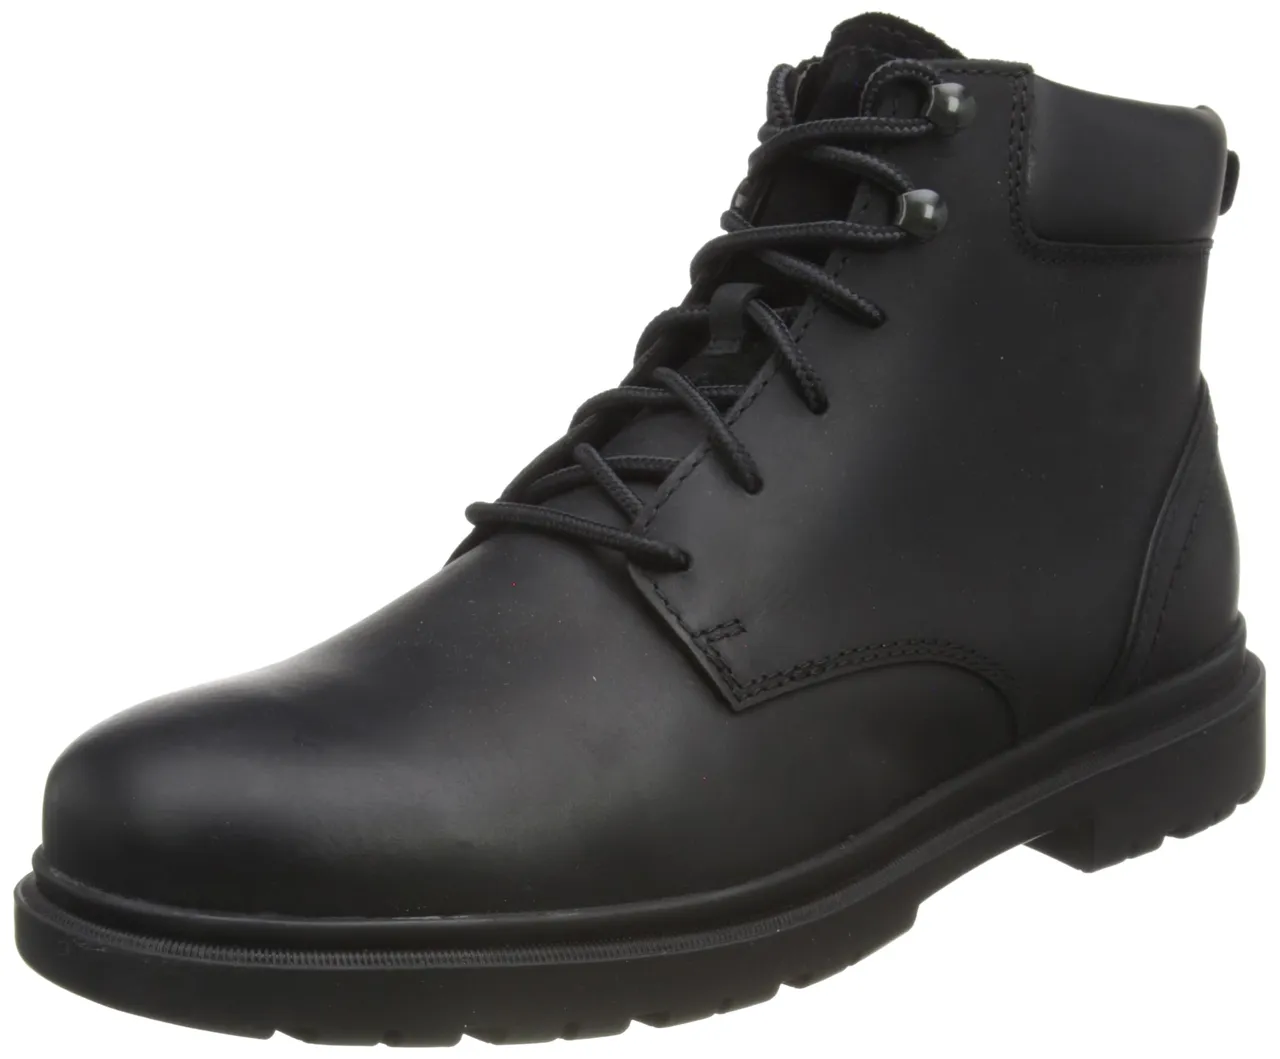 Geox Men's U ANDALO Ankle Boots